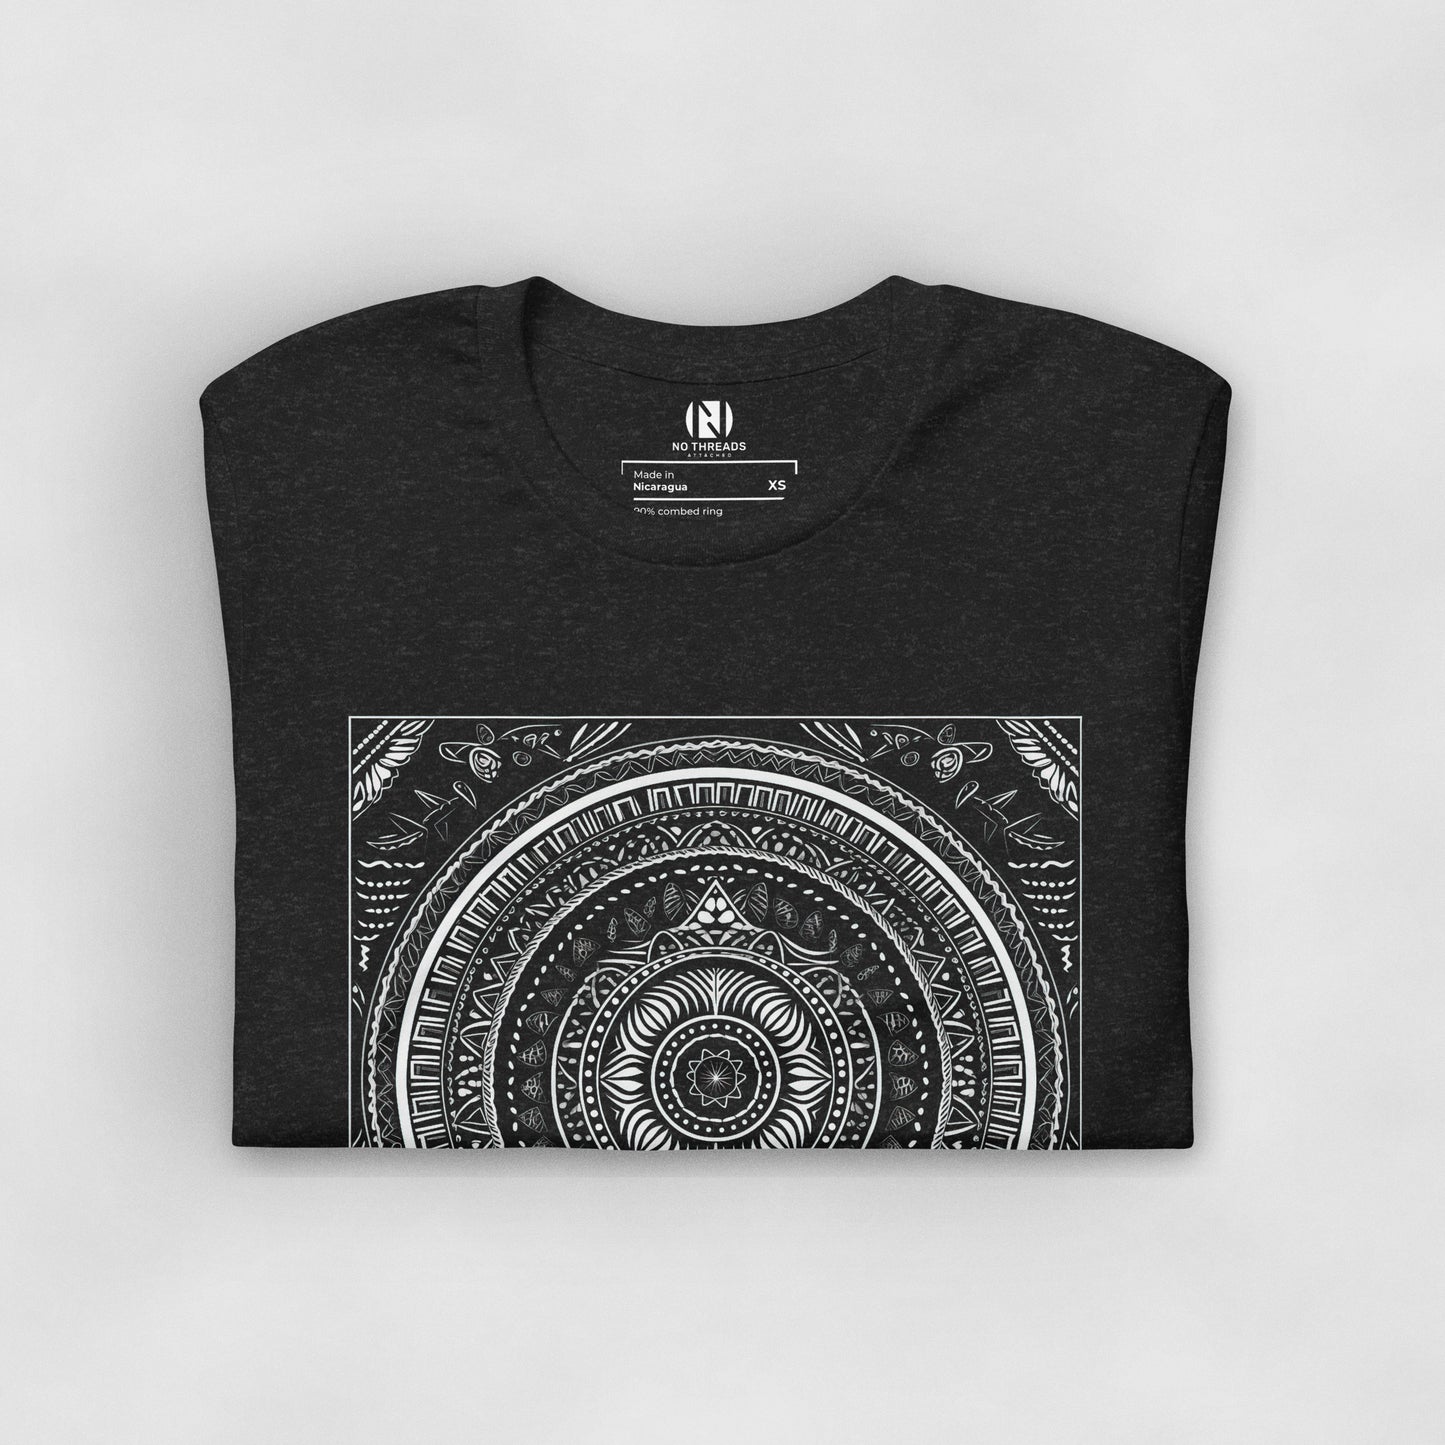 Men's black graphic tee | Travel to South Africa